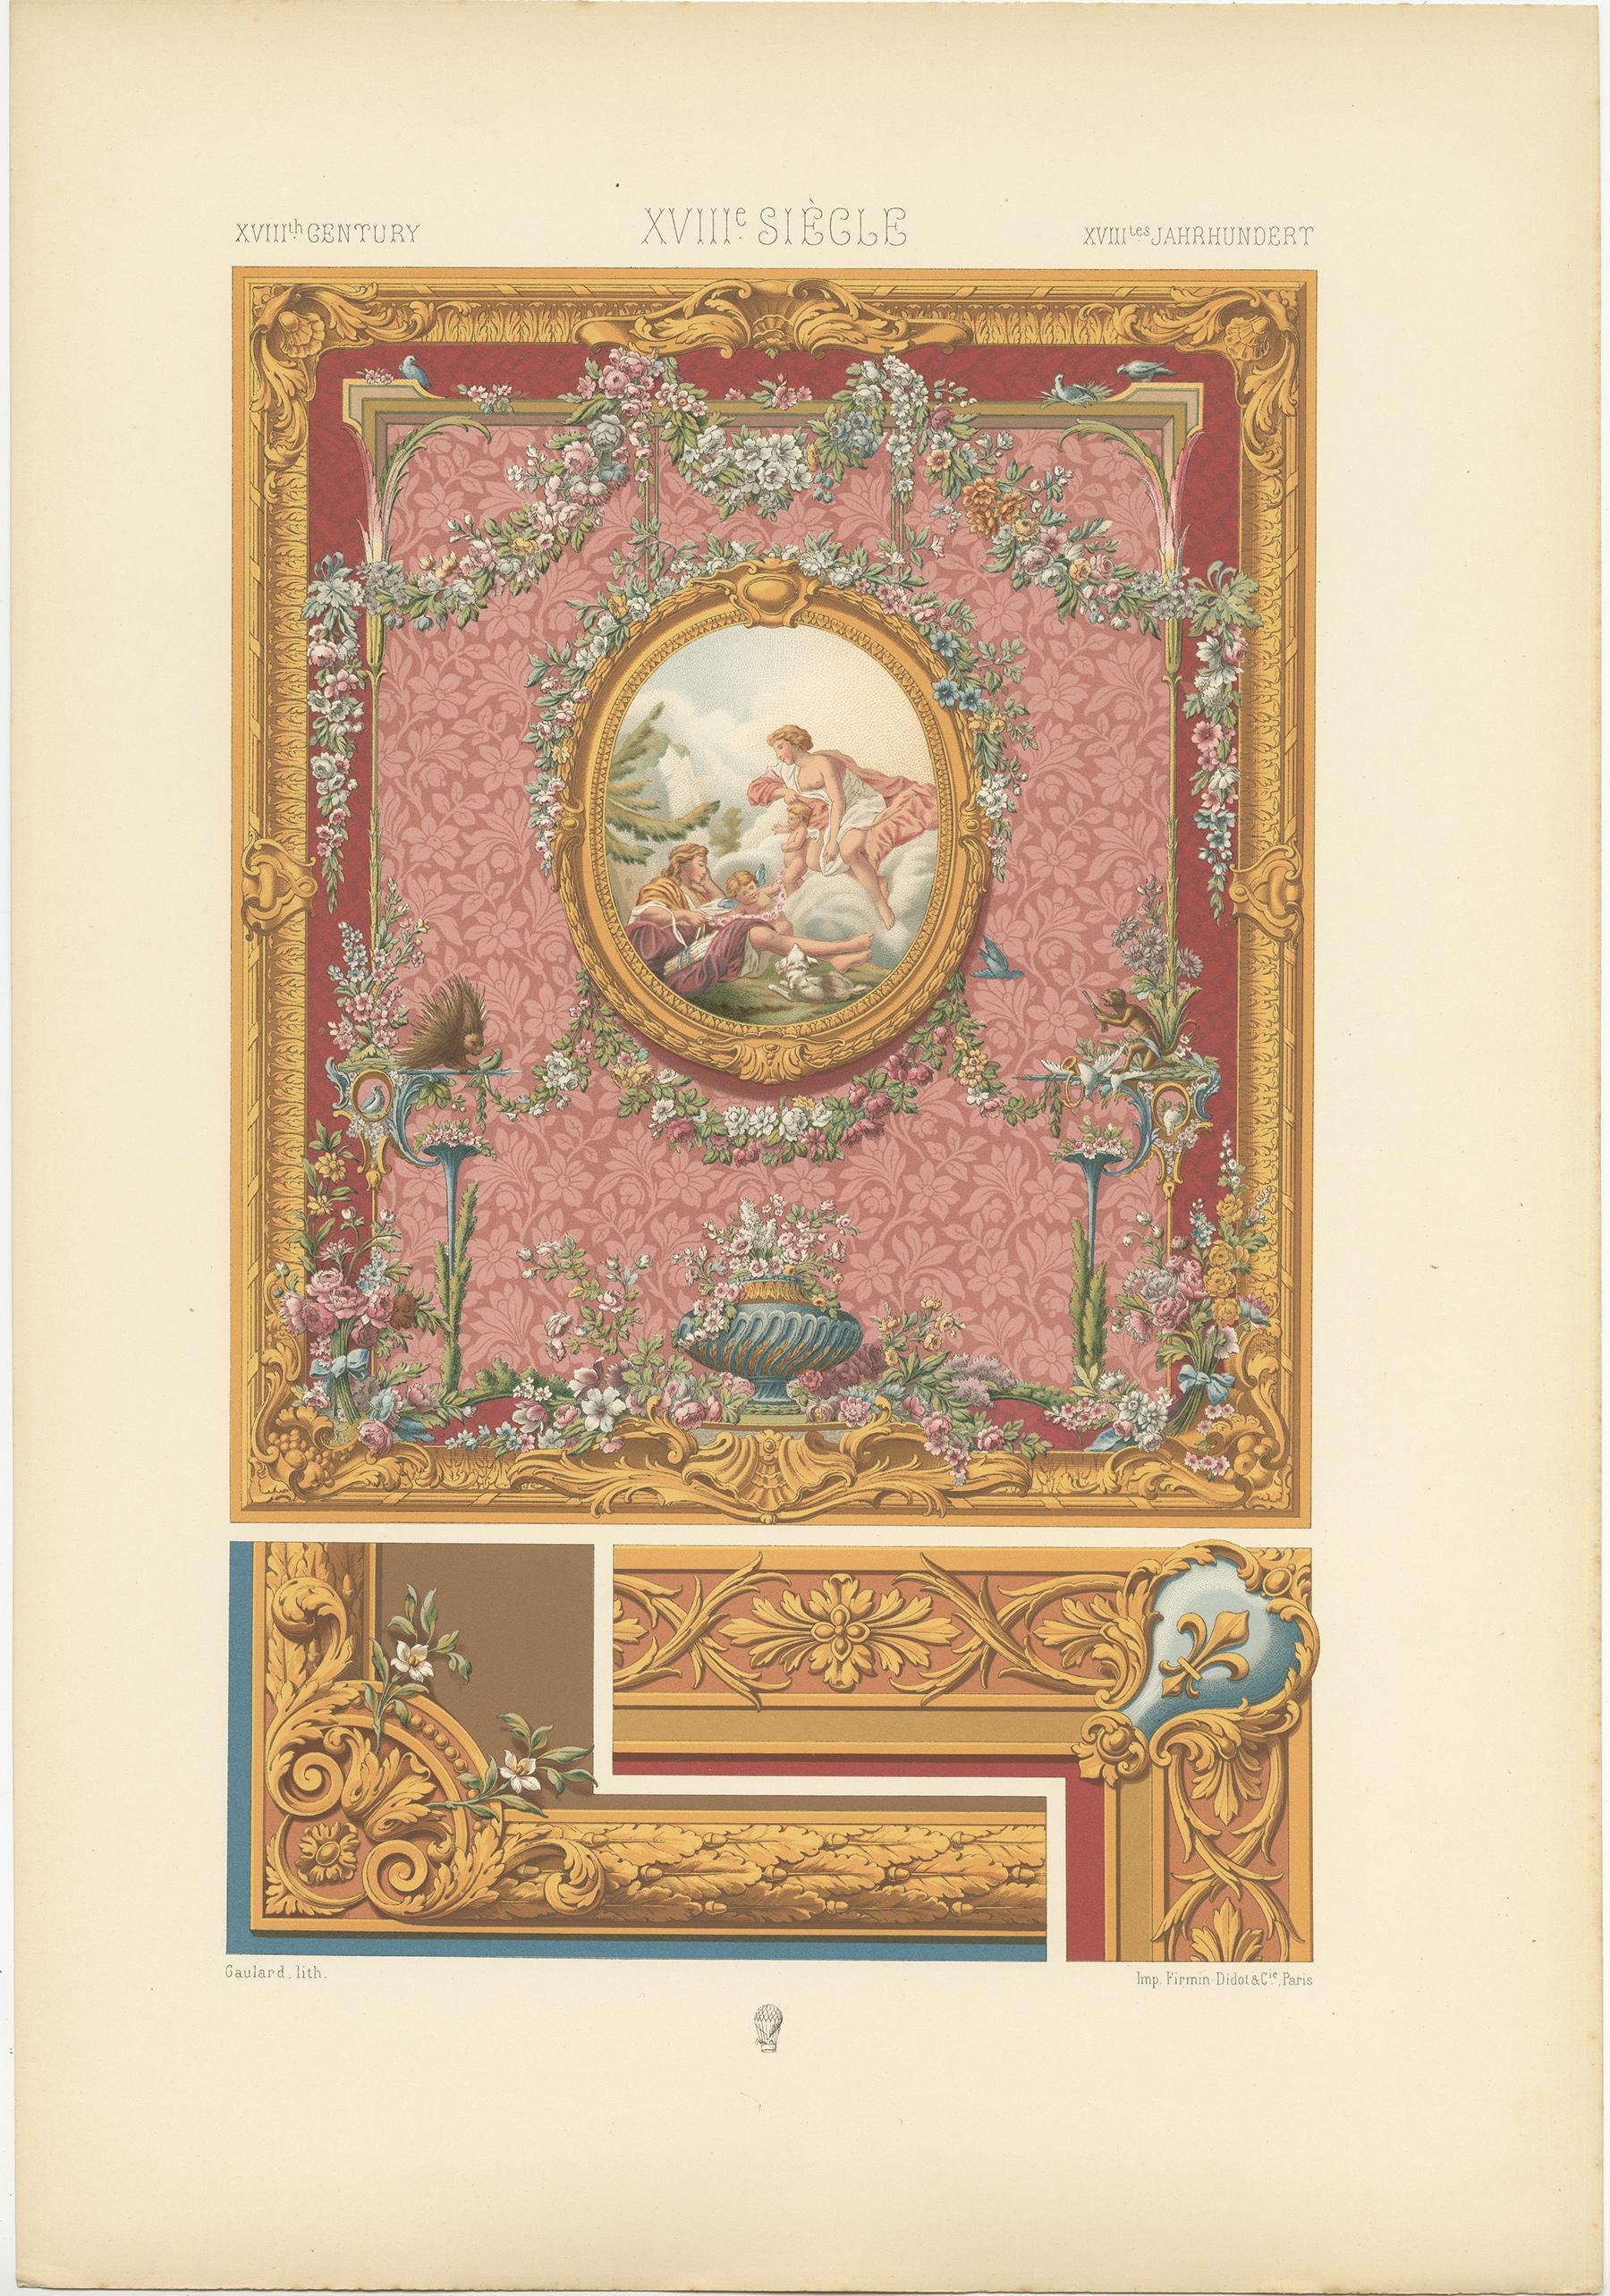 Antique print titled '18th Century - XIIIc Siècle -XVIIIles Jahrhundert'. Chromolithograph of tapestry by Boucher and Louis Tessier; details of tapestry corners ornaments. This print originates from 'l'Ornement Polychrome' by Auguste Racinet.